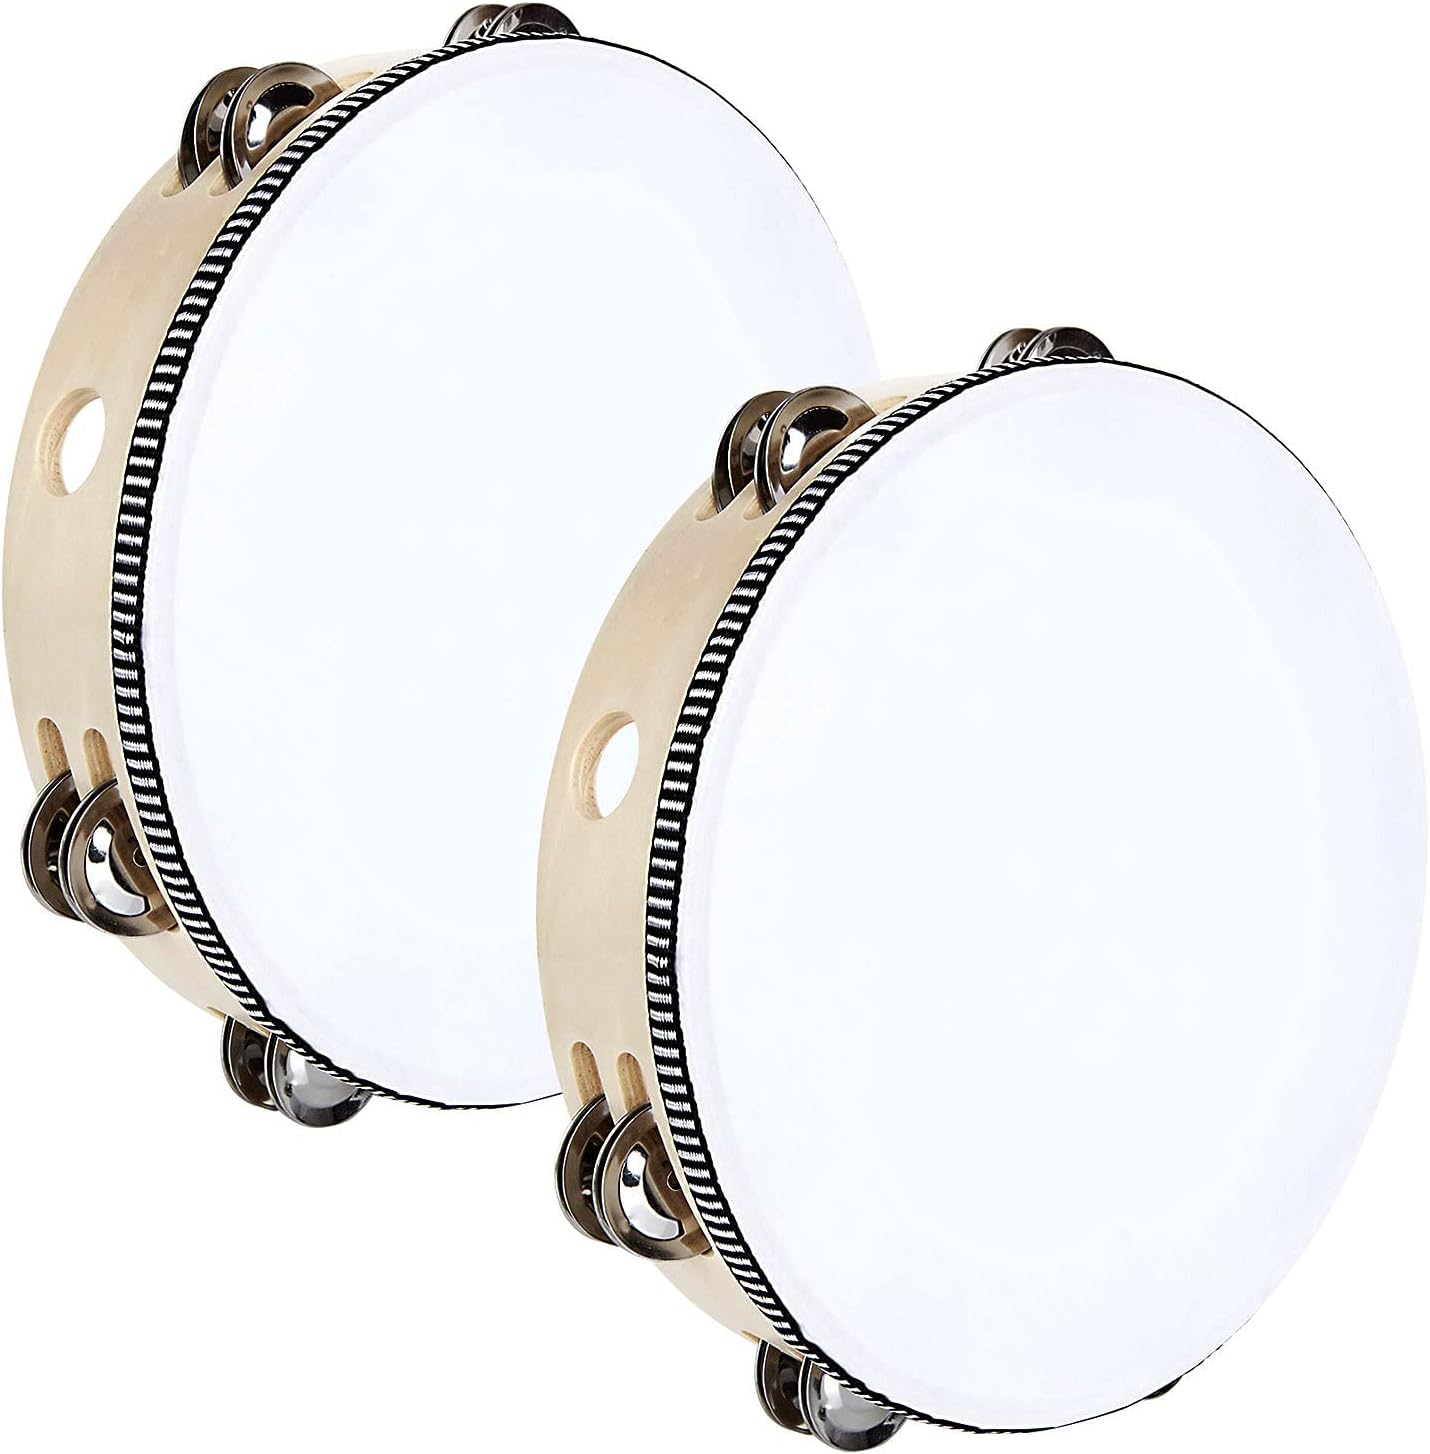 Tambourine 10 inch for Adults Handheld Tambourine Drum with Metal Jingles for Church